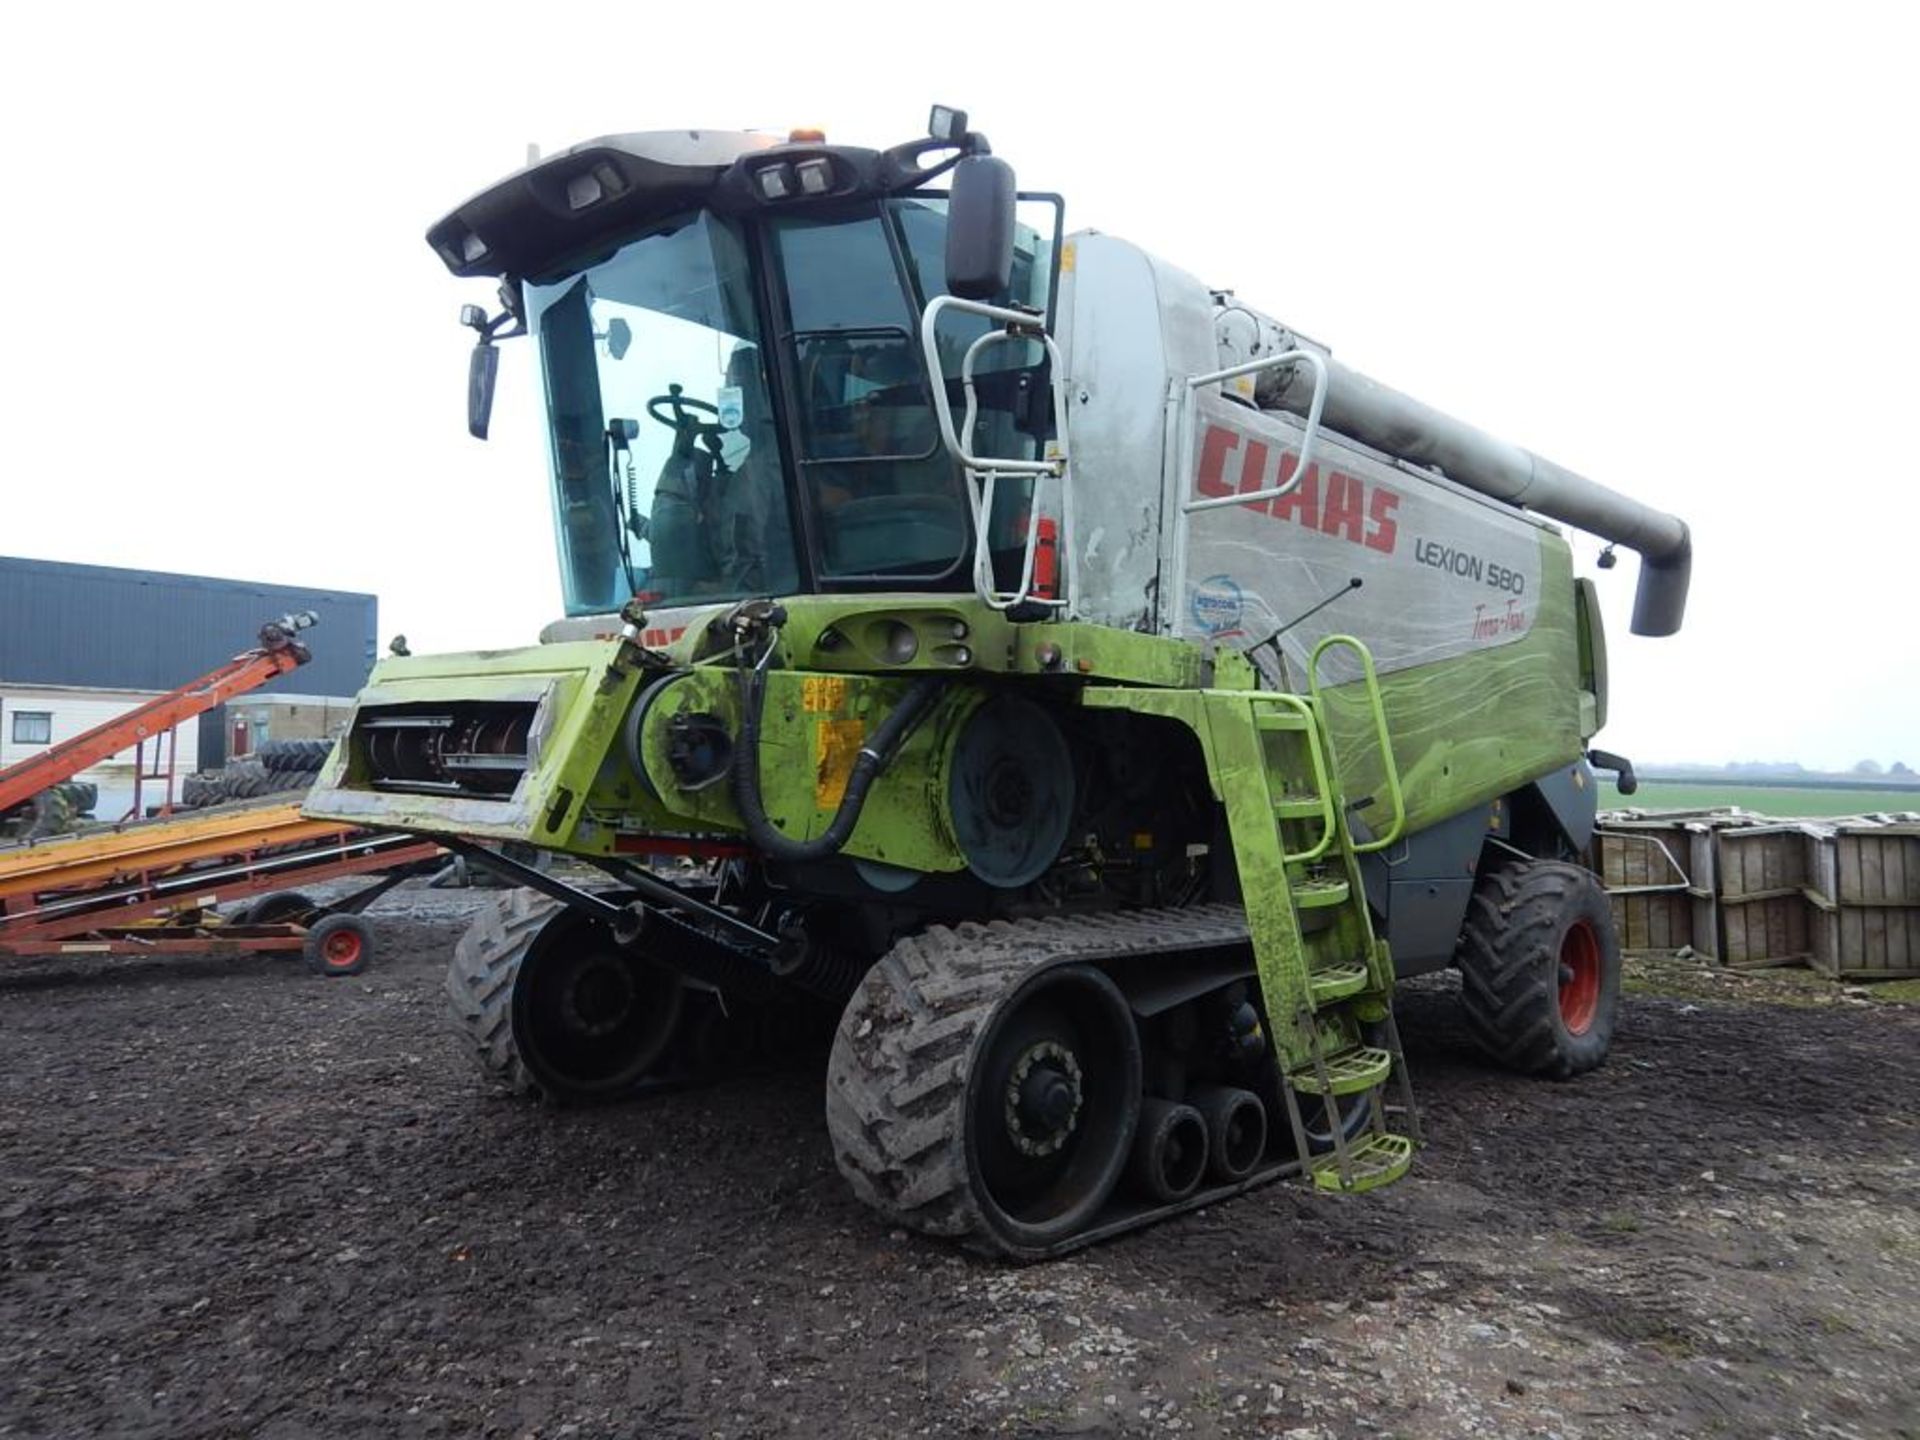 2004 CLAAS Lexion 580 Terra-Trac COMBINE HARVESTER Fitted with Claas Vario V900 Auto-Contour - Image 2 of 8